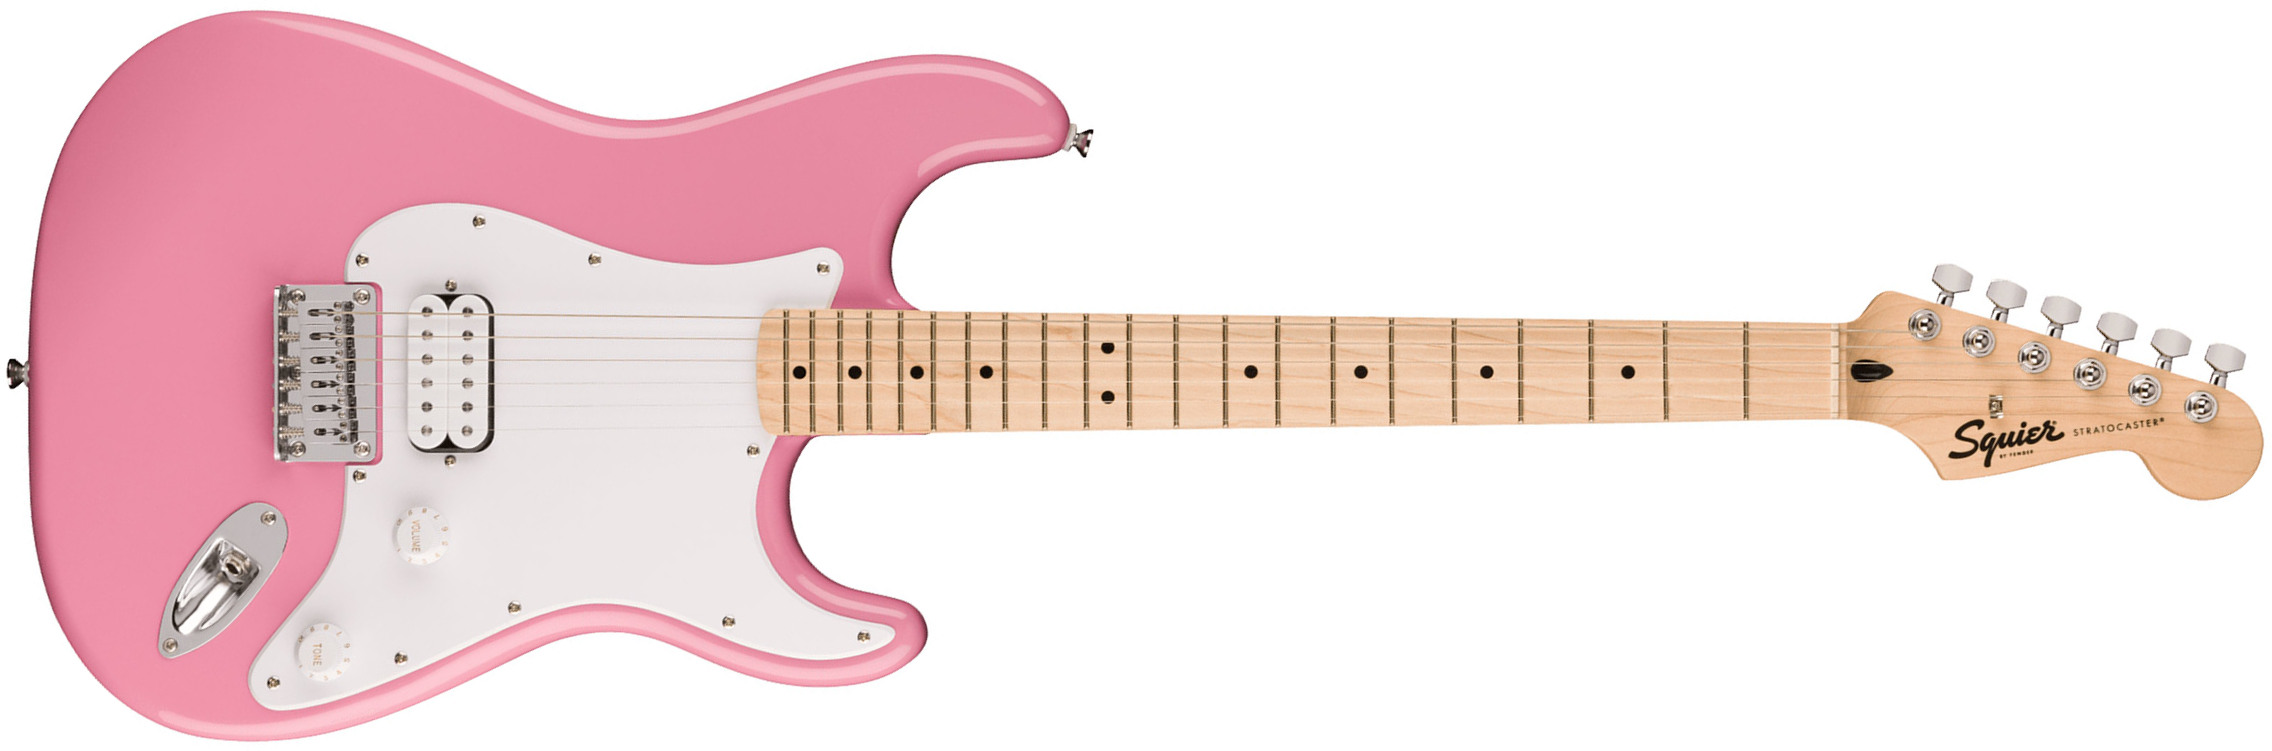 Squier Strat Sonic Hardtail H Ht Mn - Flash Pink - E-Gitarre in Str-Form - Main picture